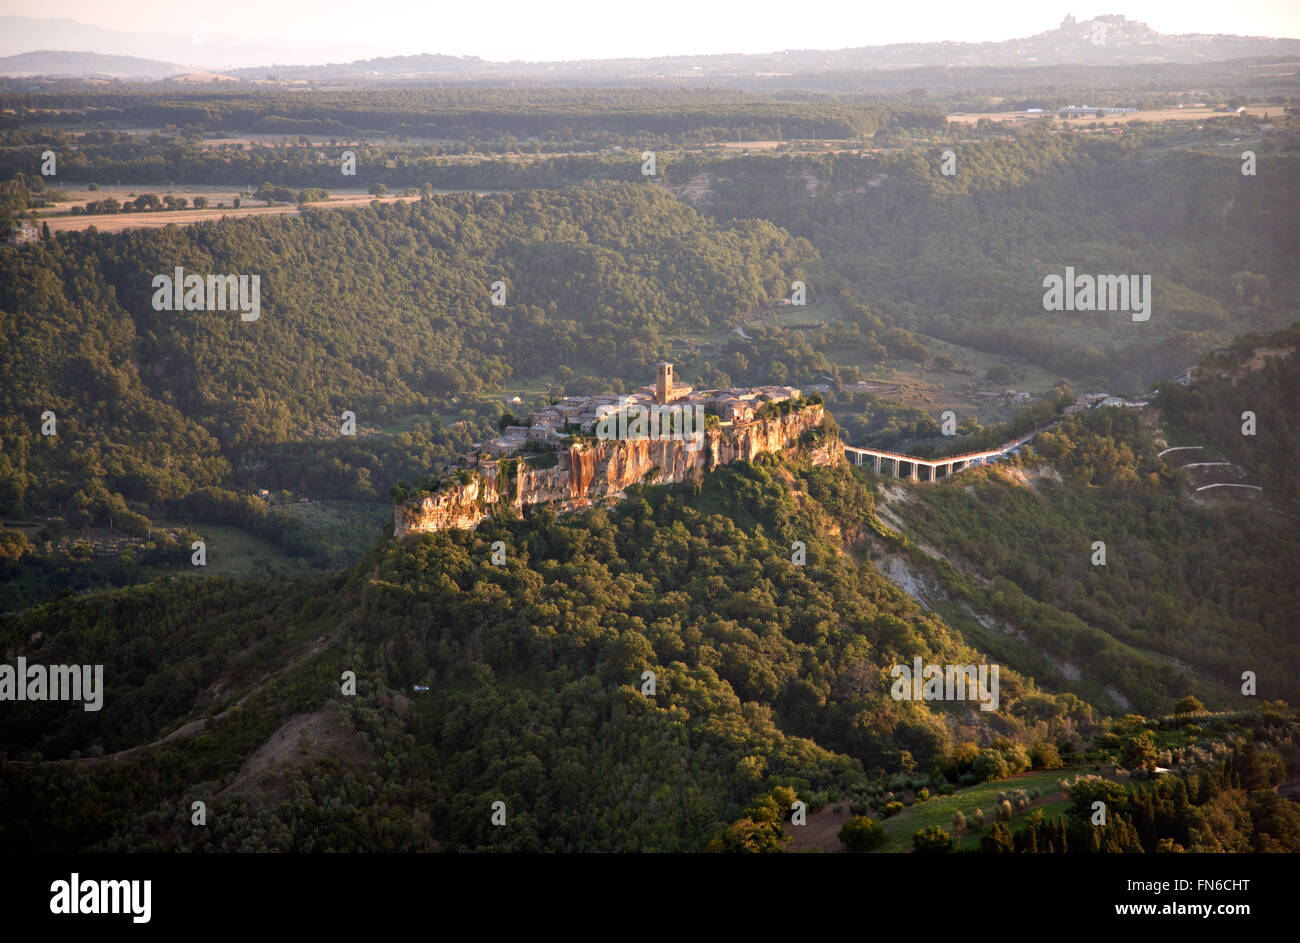 Aerial view of Civita di Bagnoregio, medieval town, central Italy, at dusk. Stock Photo